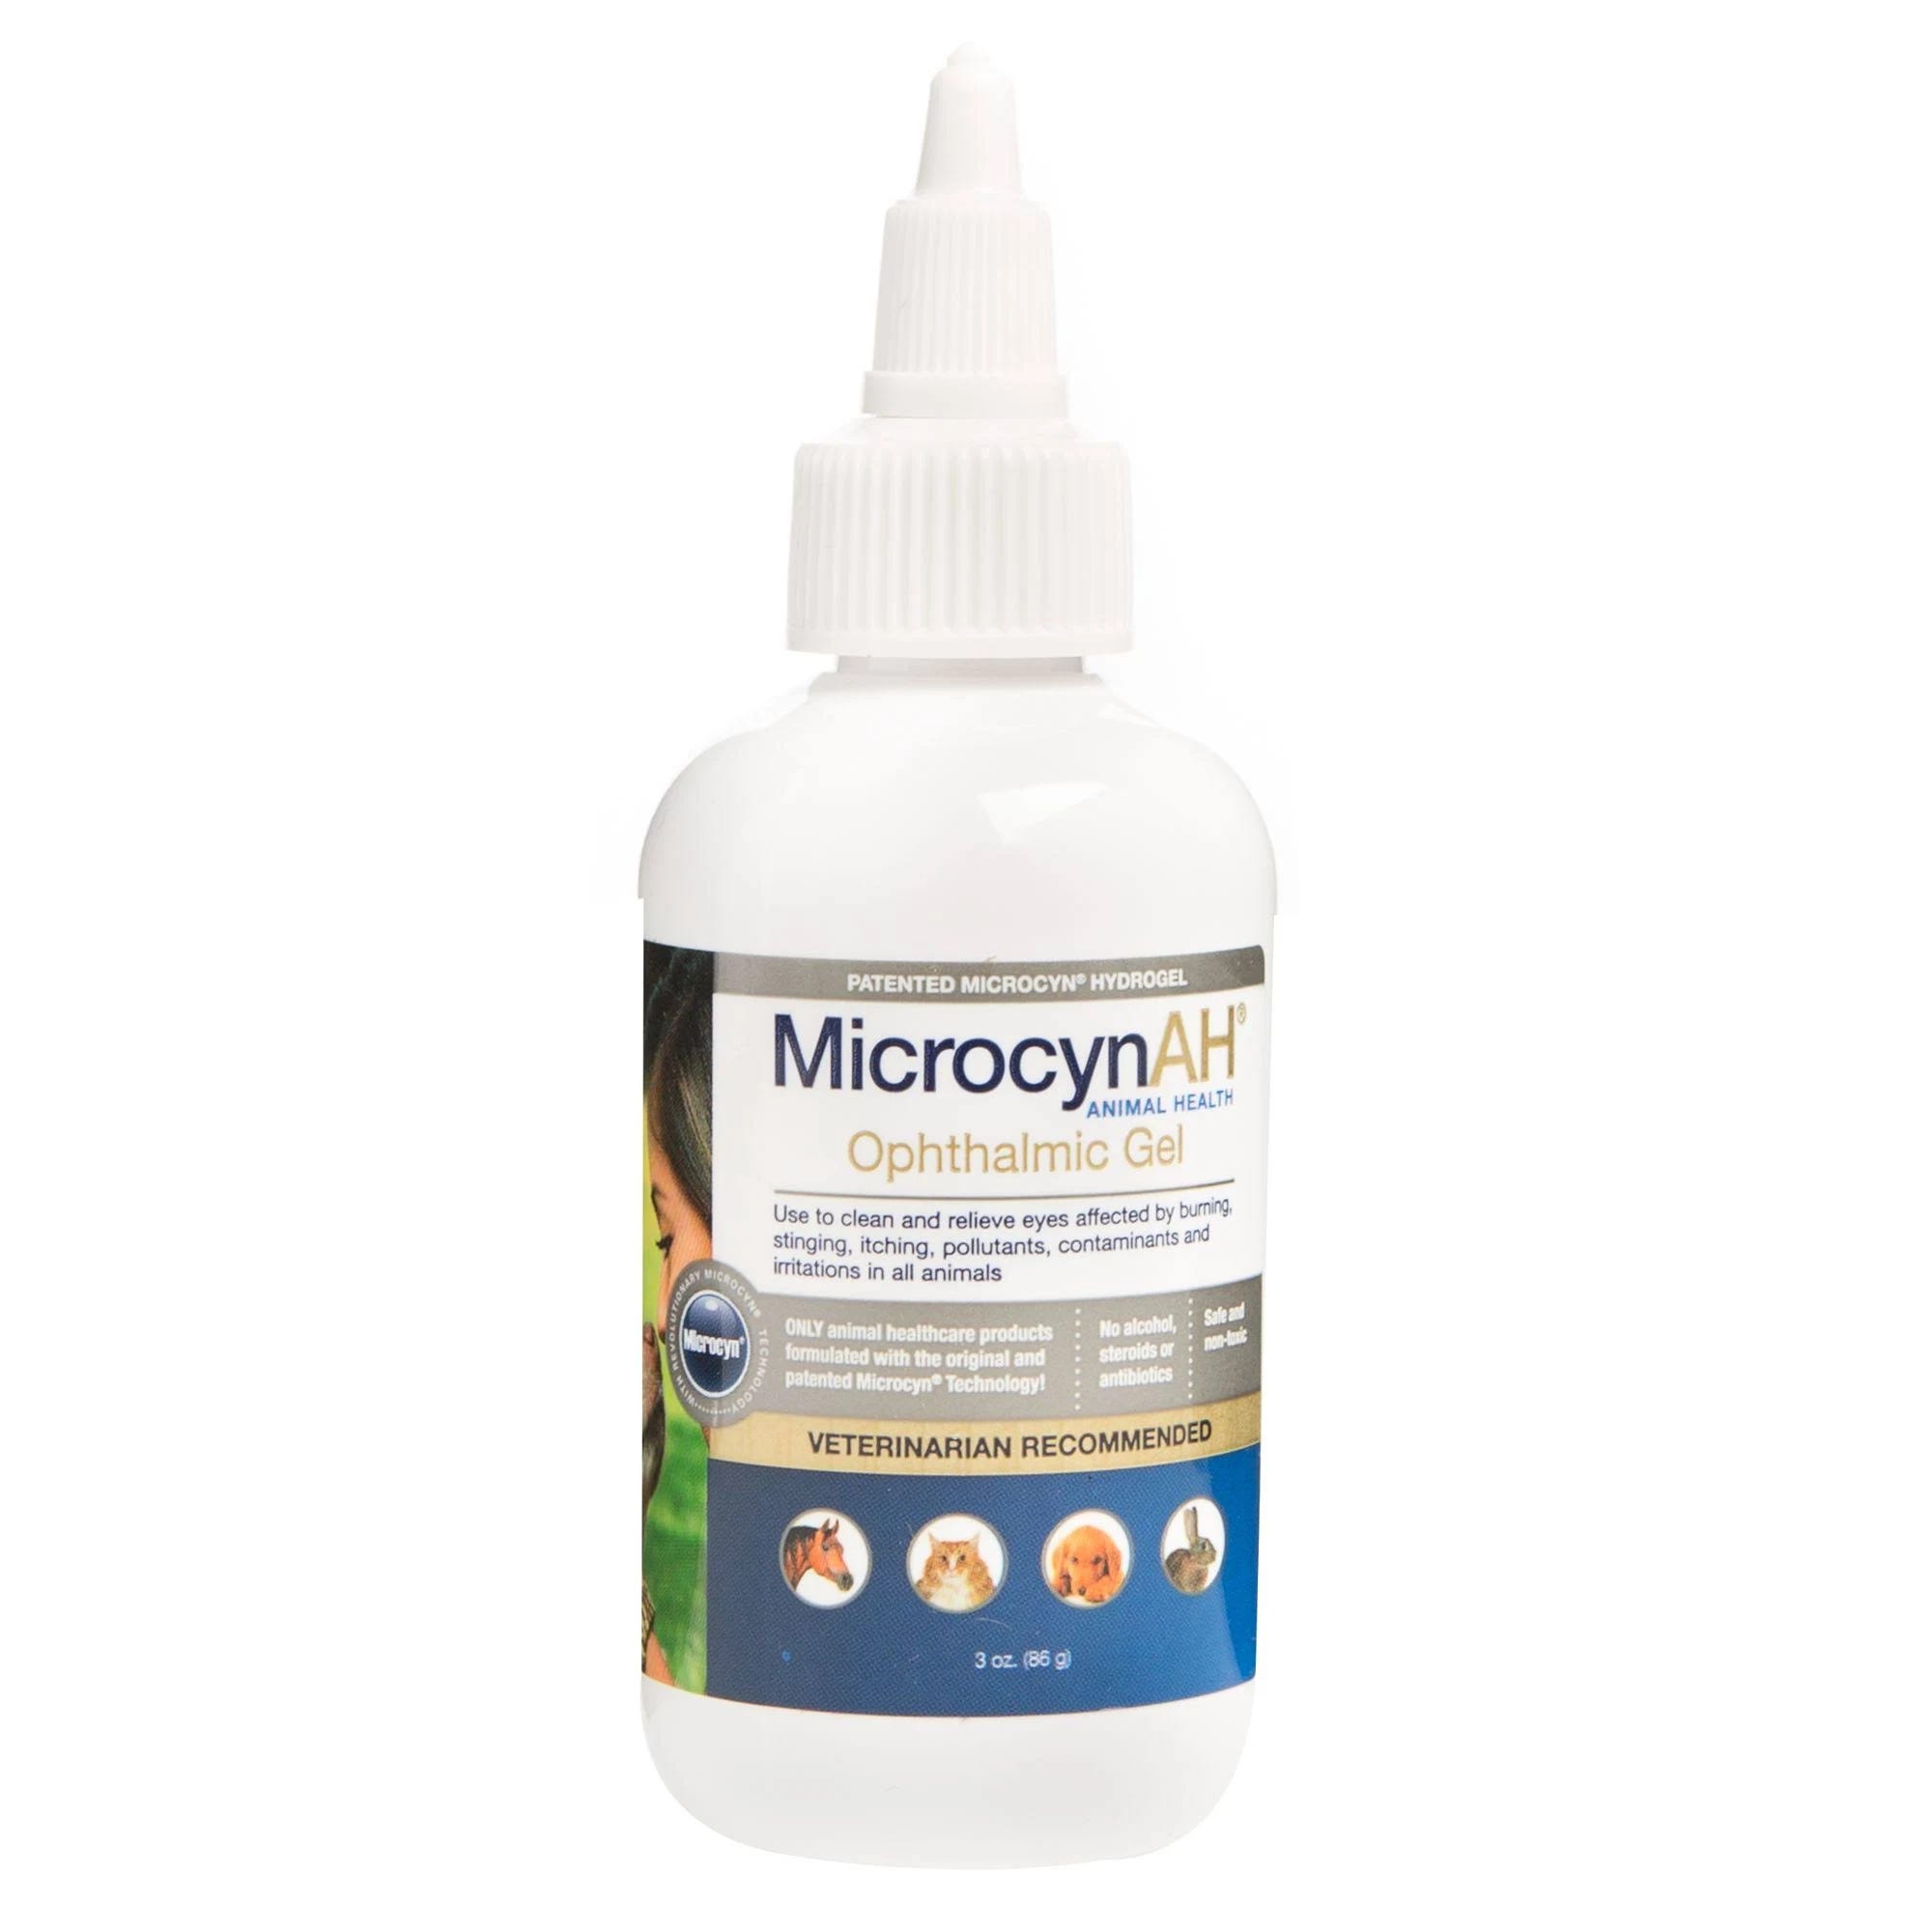 Veterinarian-Recommended Dog Eye Drops for Soothing Eye Irritations and Protecting Eyes | Image